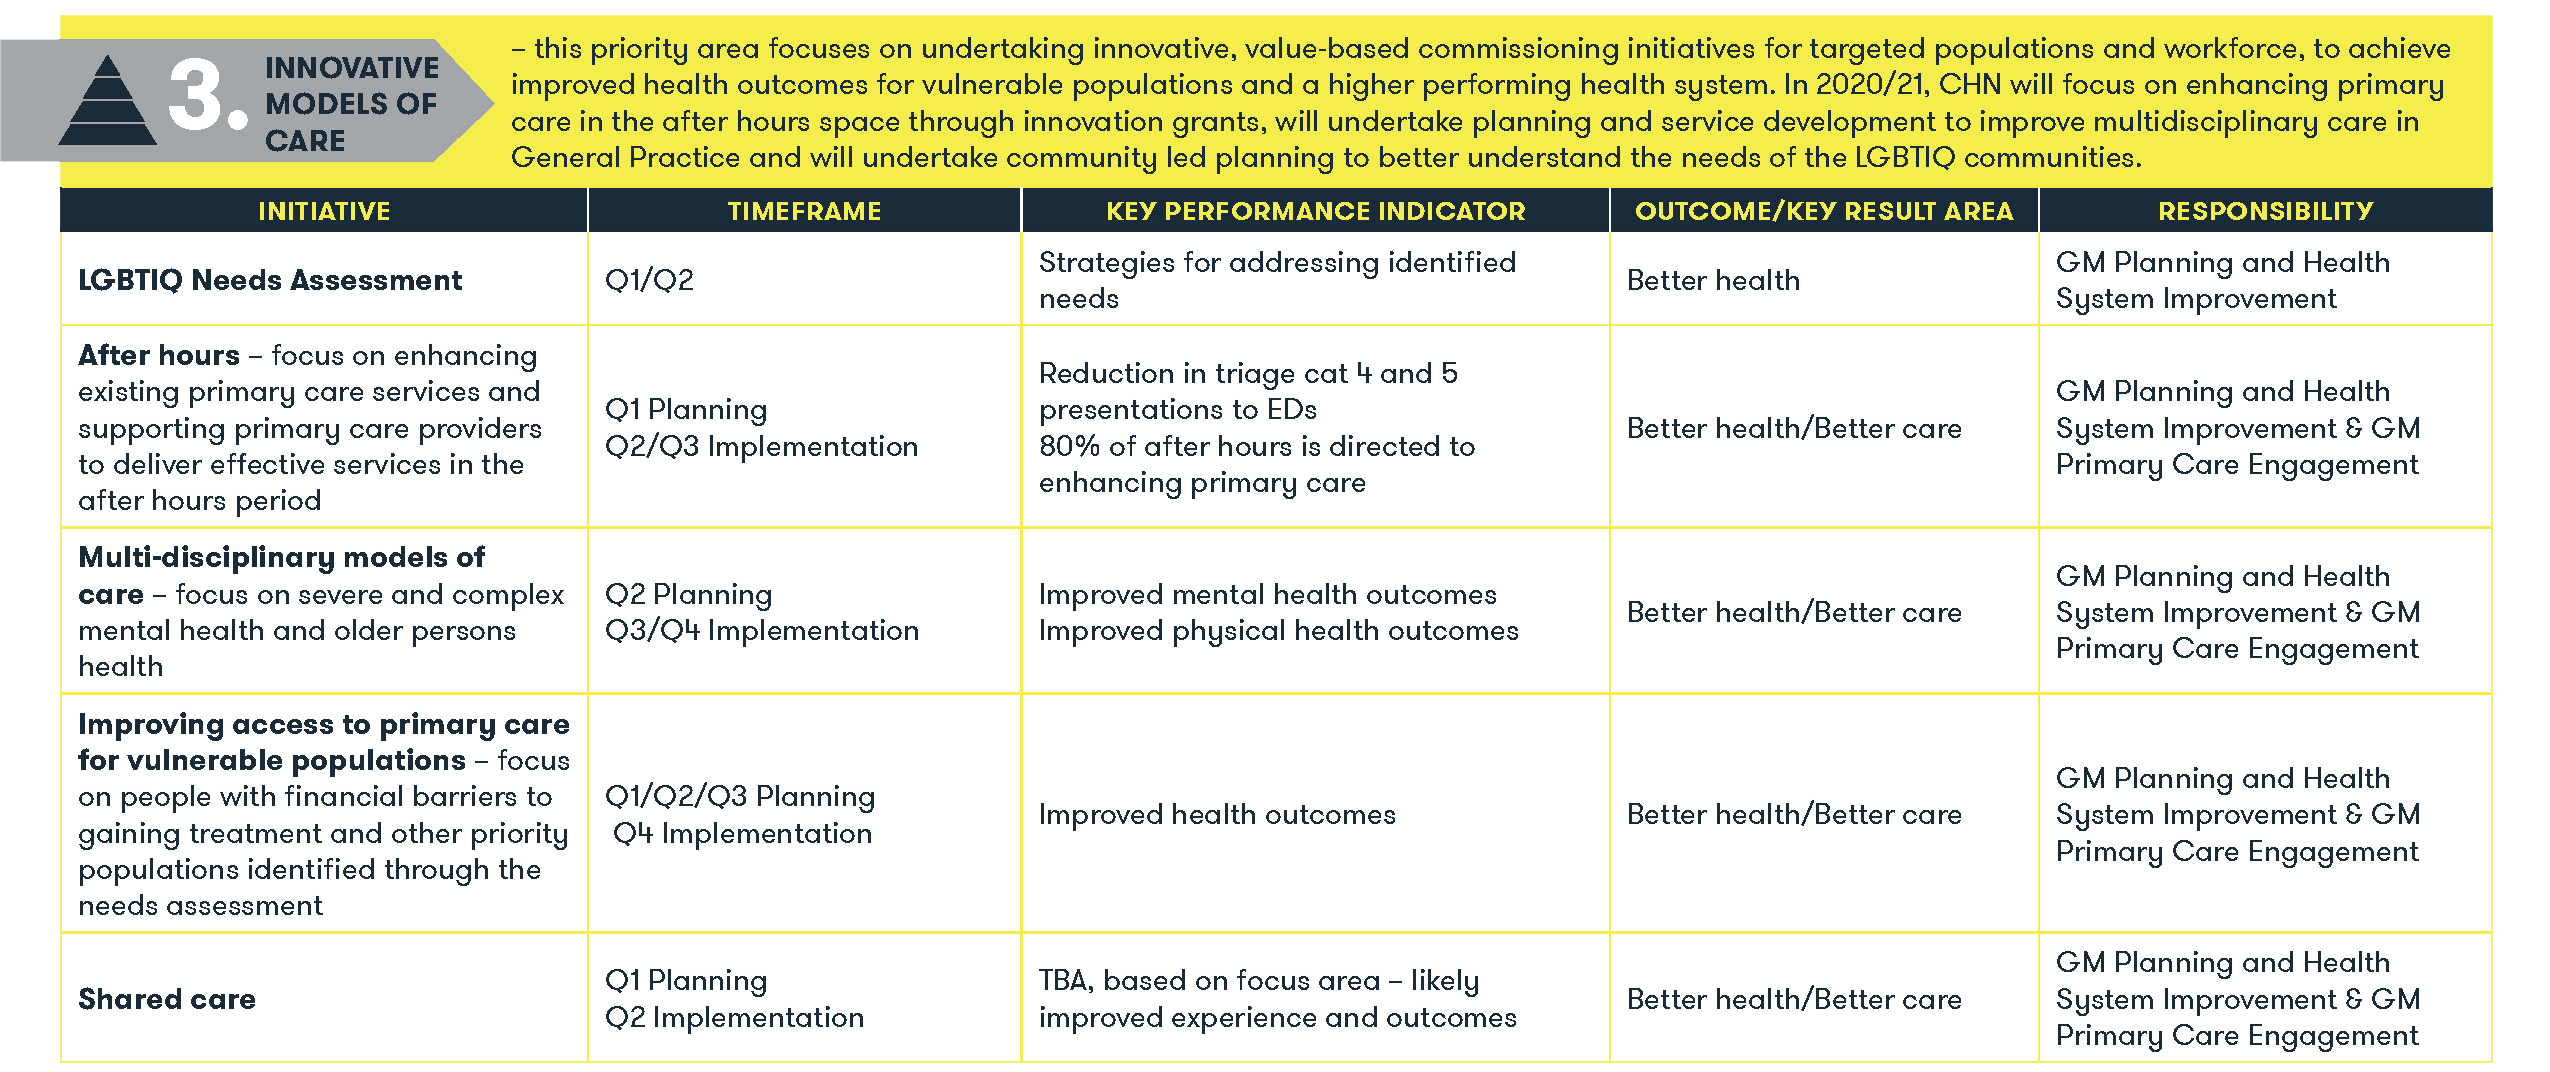 3. Innovative Models of Care